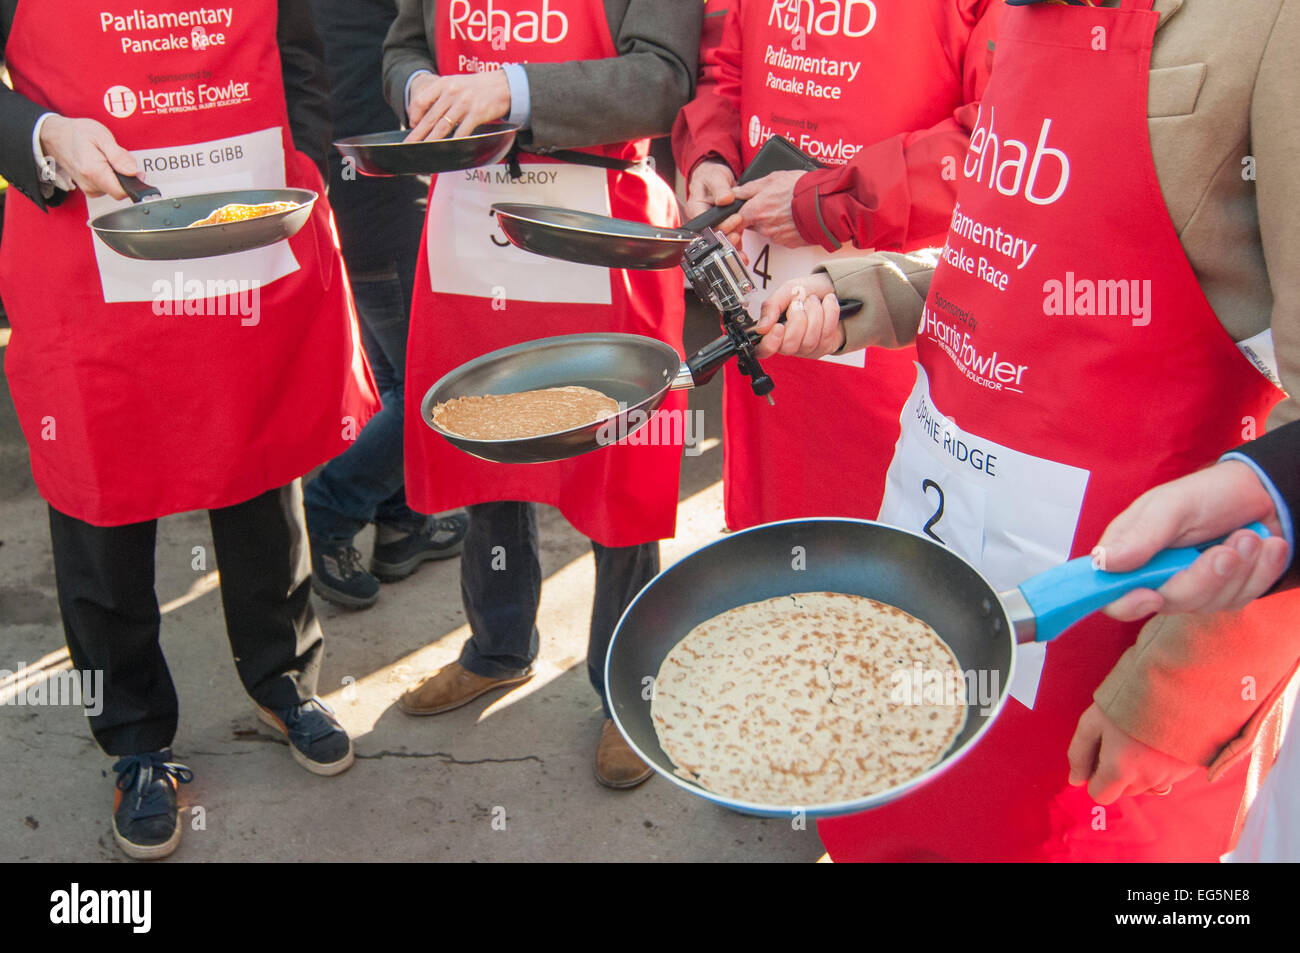 London, UK. 17th February, 2015.   MPs, Lords and members of the Parliamentary Press Gallery take part in the annual, charity Parliamentary Pancake Race in Victoria Tower Gardens, next to the Houses of Parliament on Shrove Tuesday. Pictured: the frying pans of the Media Team. Credit:  Stephen Chung/Alamy Live News Stock Photo